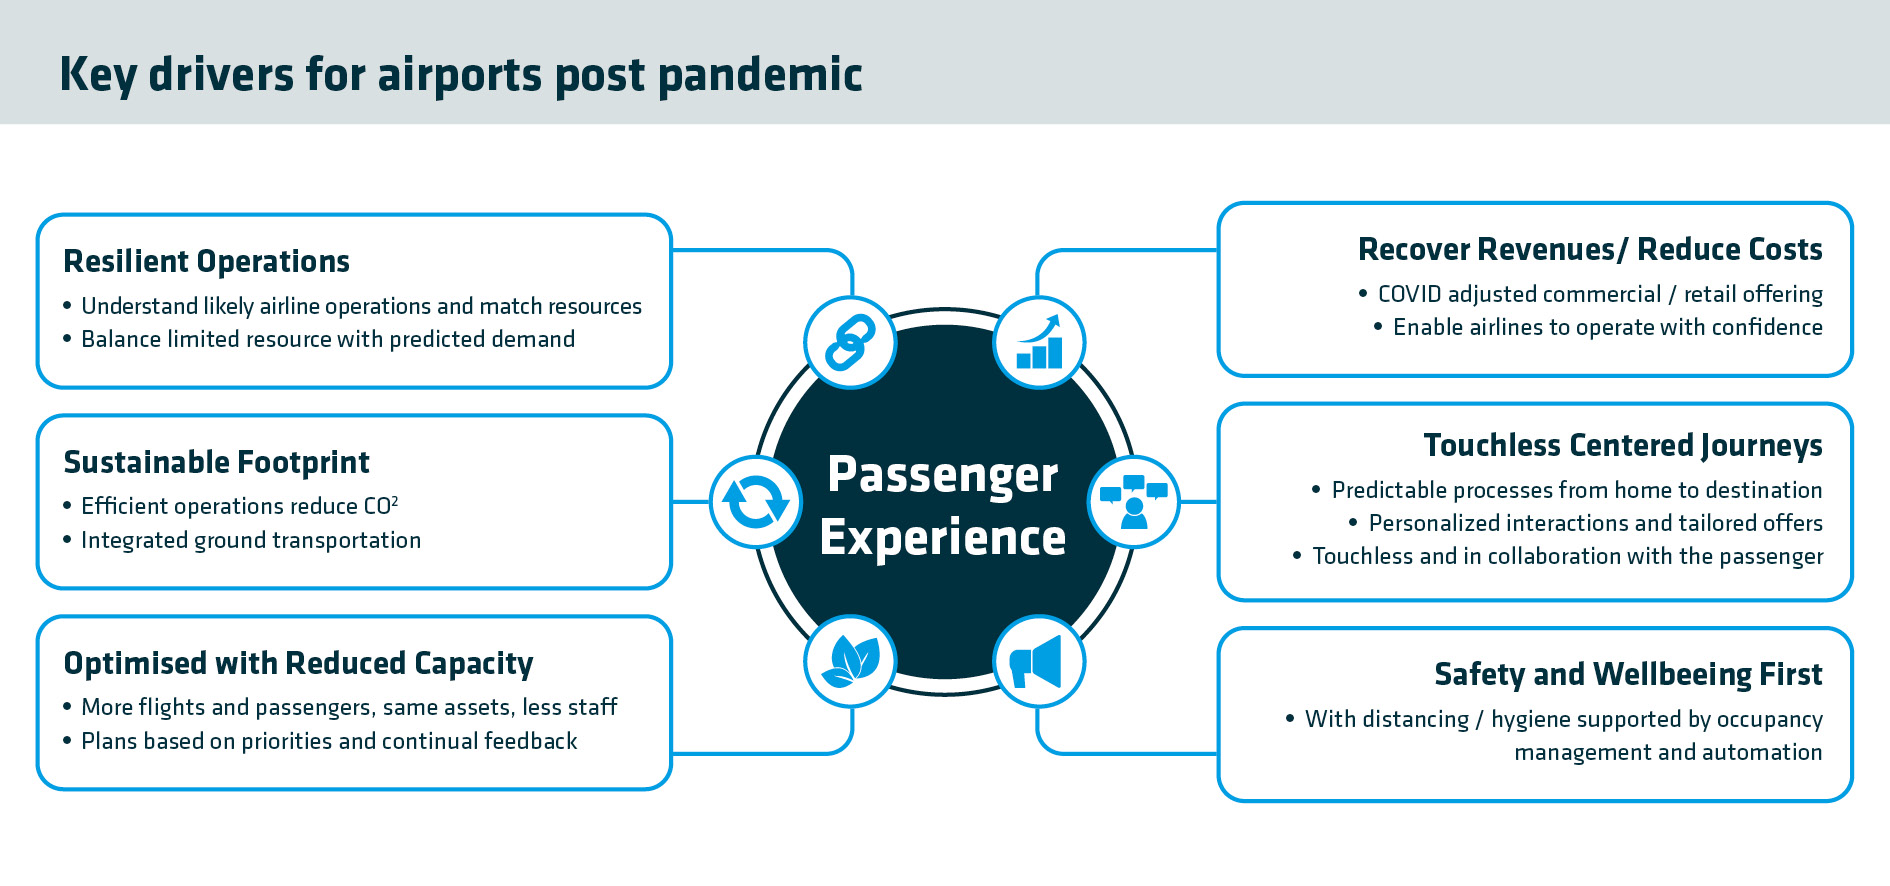 Key drivers for airports post pandemic